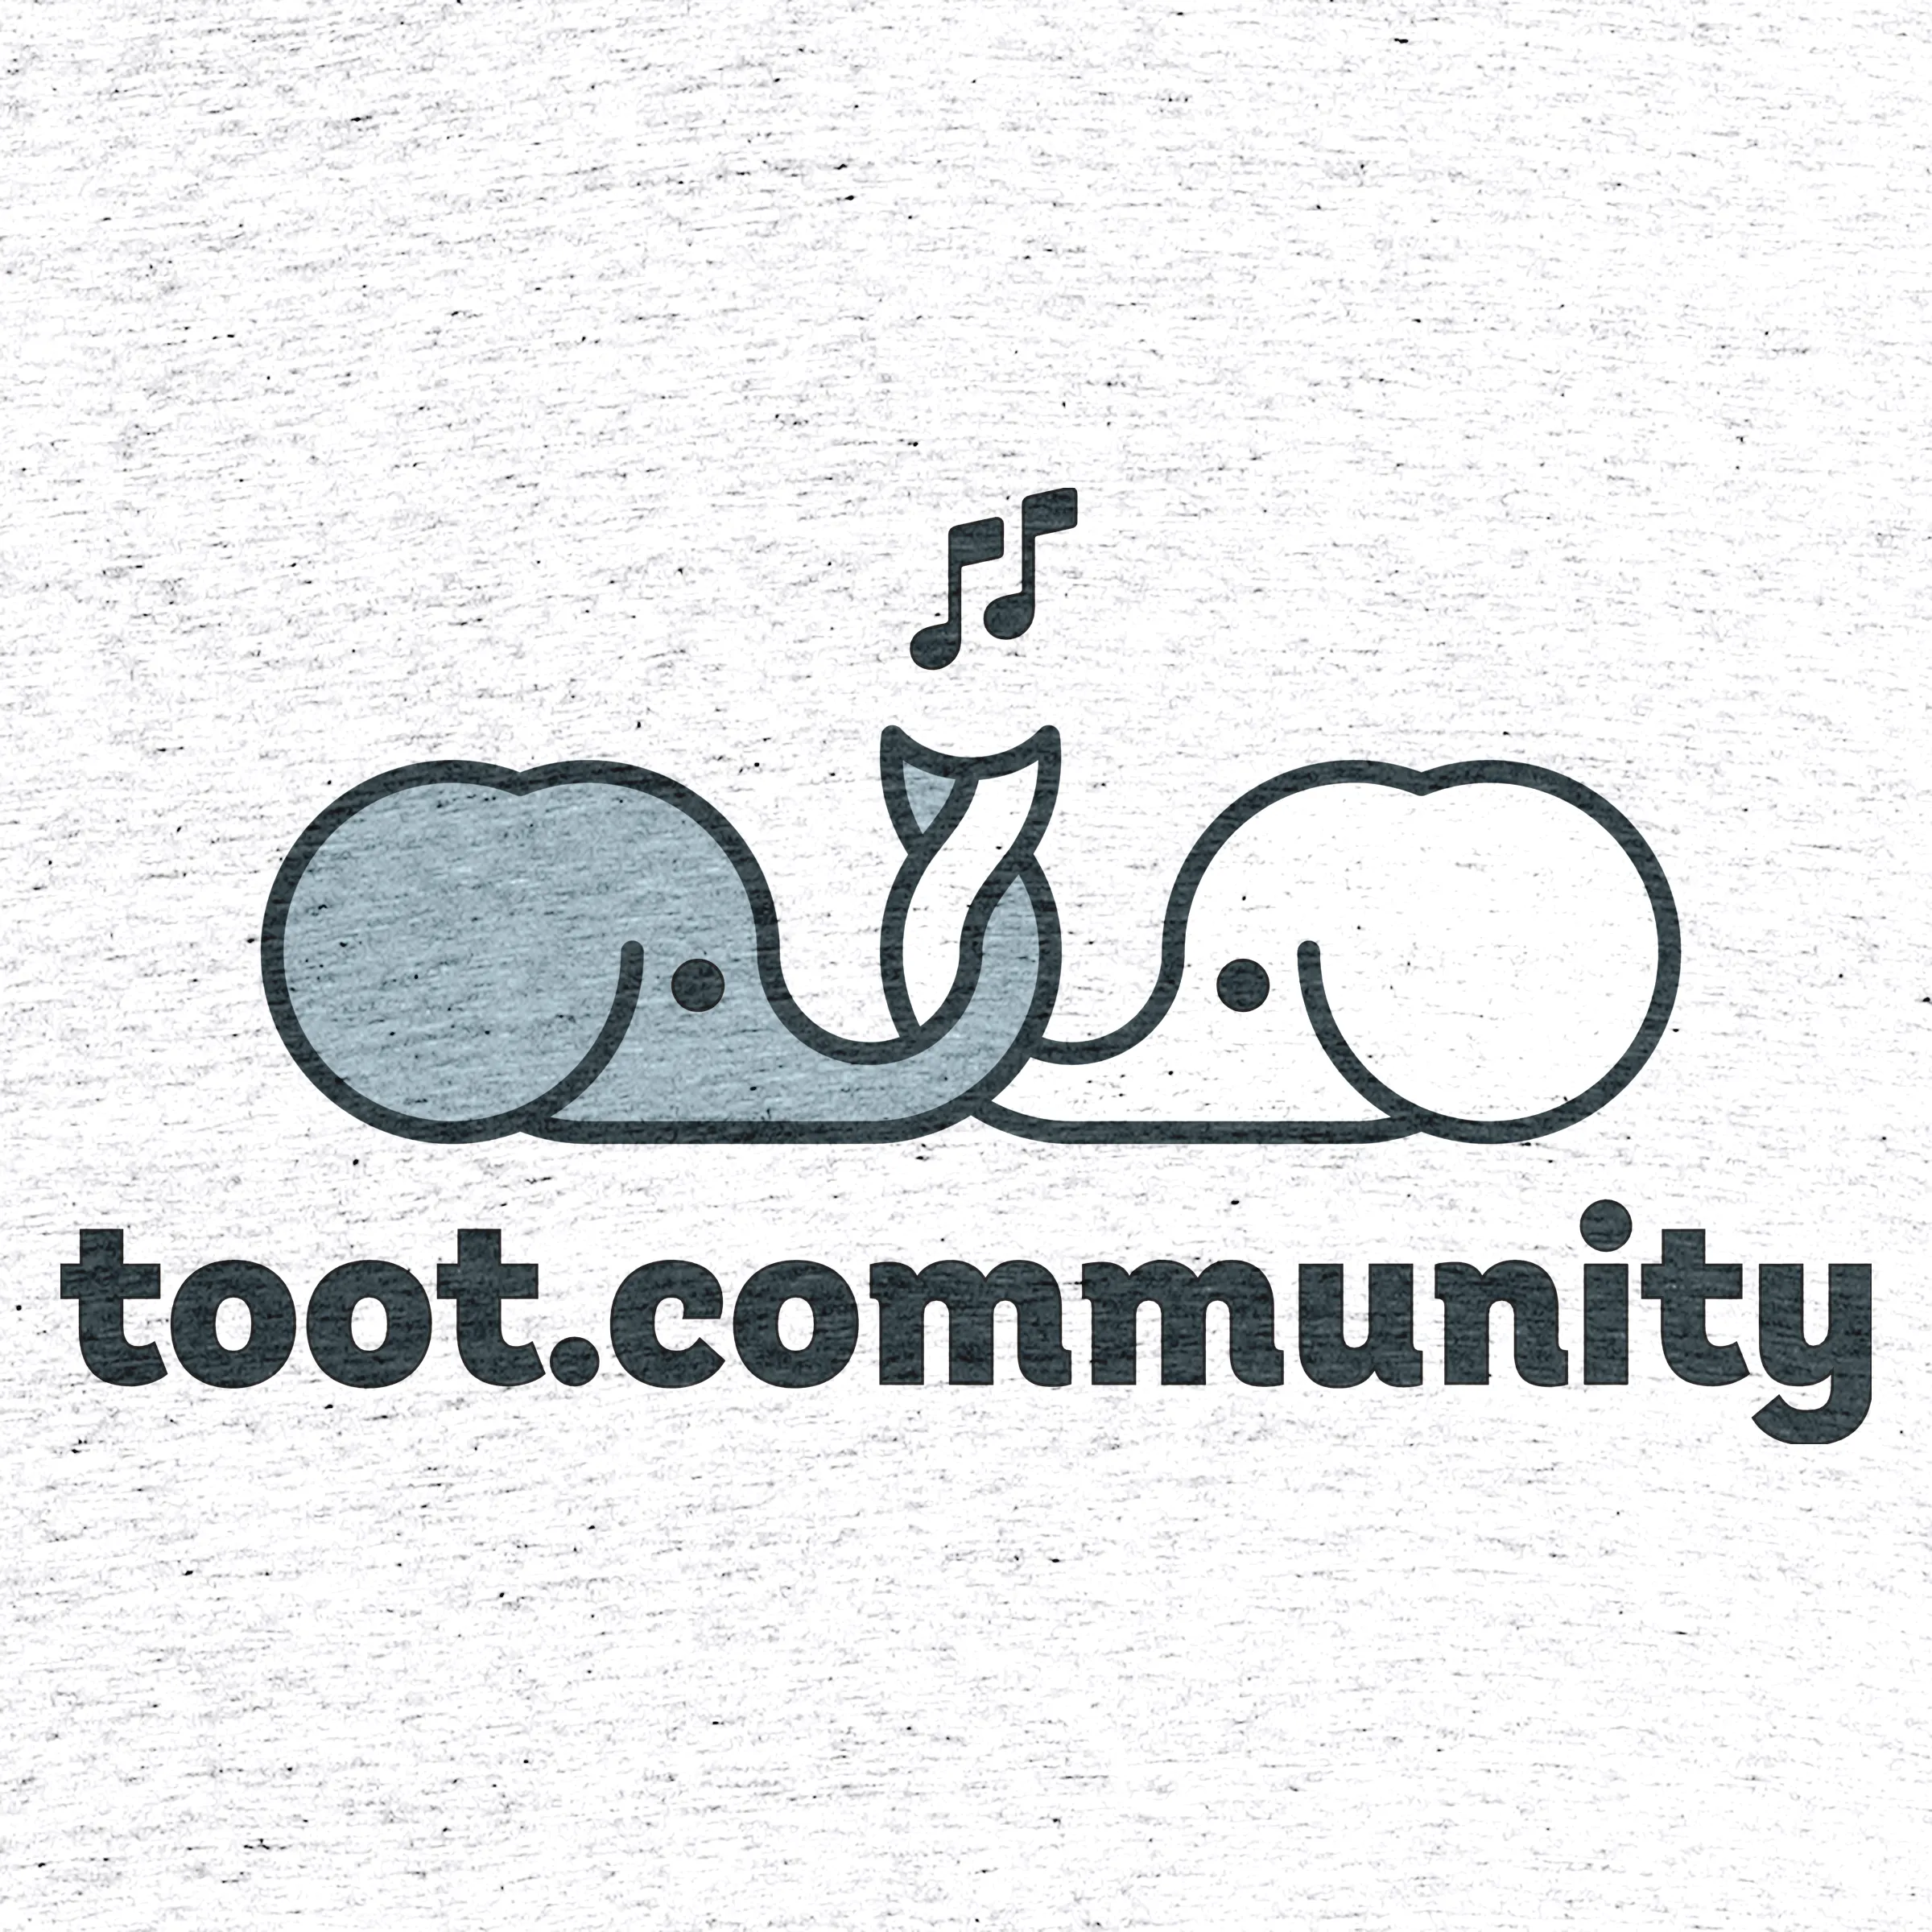 toot.community #1” graphic tee, pullover hoodie, tank, onesie, pullover  crewneck, and long sleeve tee by toot.community.